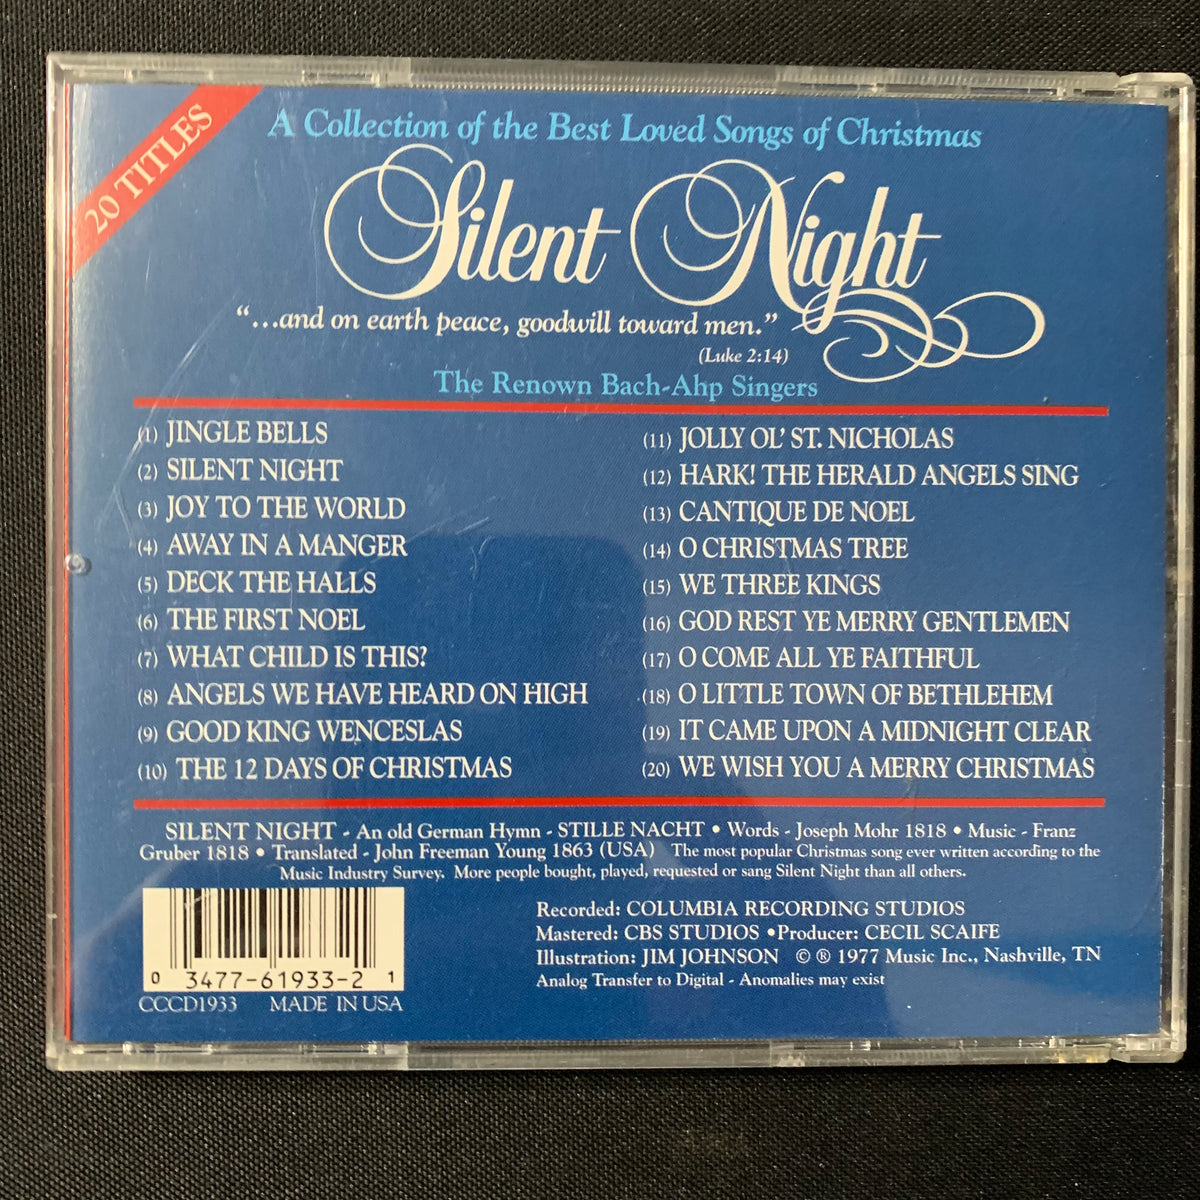 CD 'Silent Night' Best Loved Christmas Songs 20 tracks Joy To the Worl